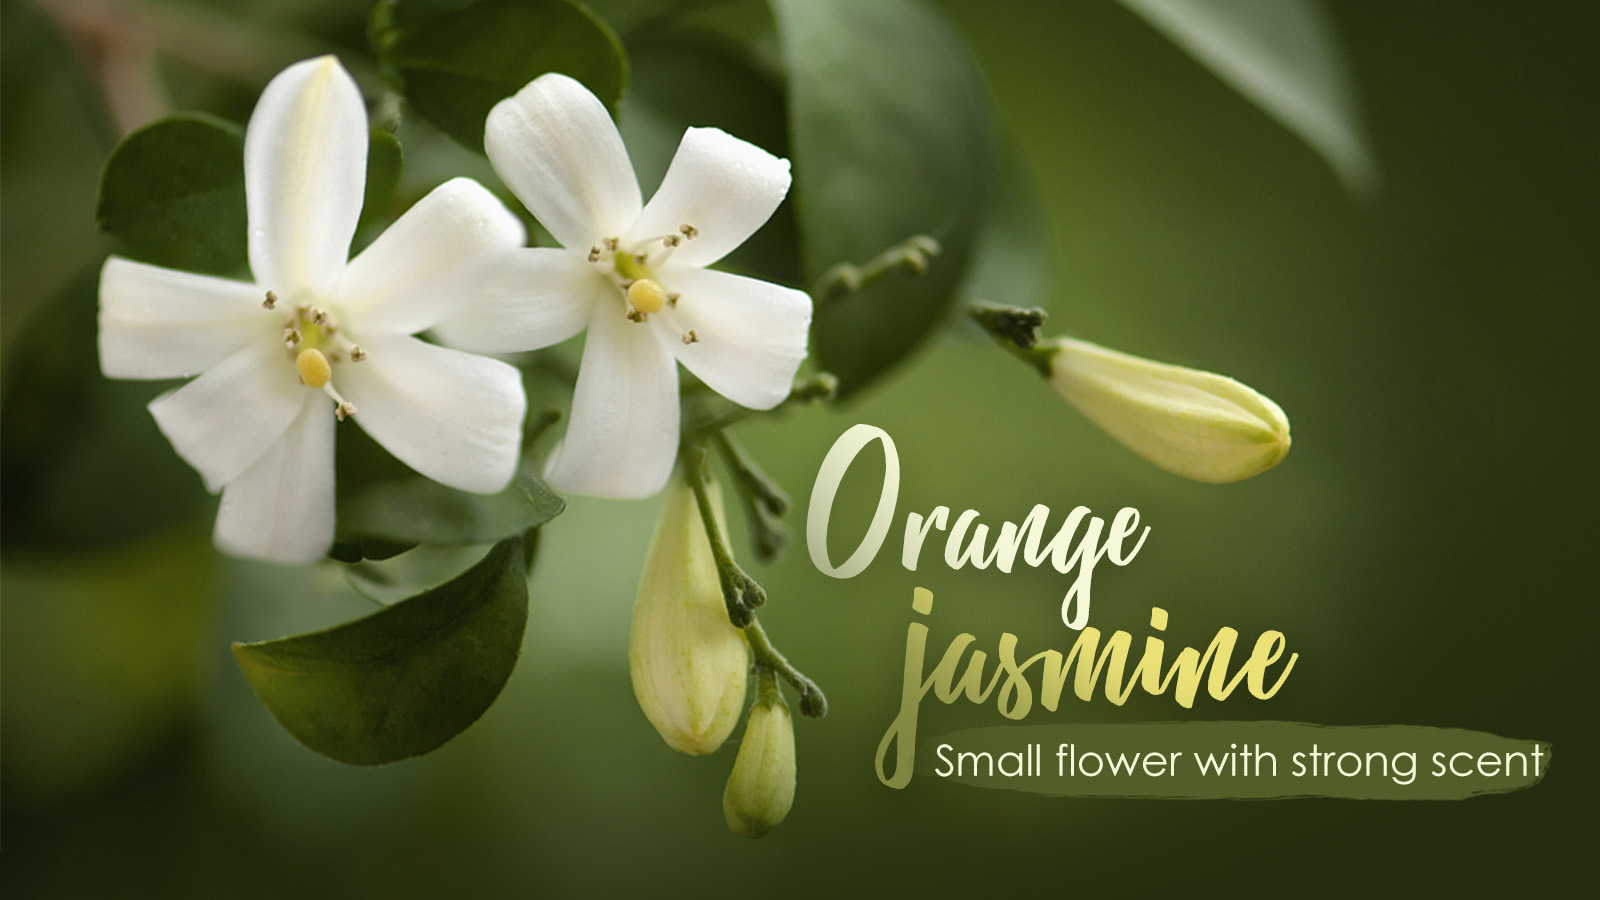 Orange jasmine: A small flower with a strong scent - CGTN